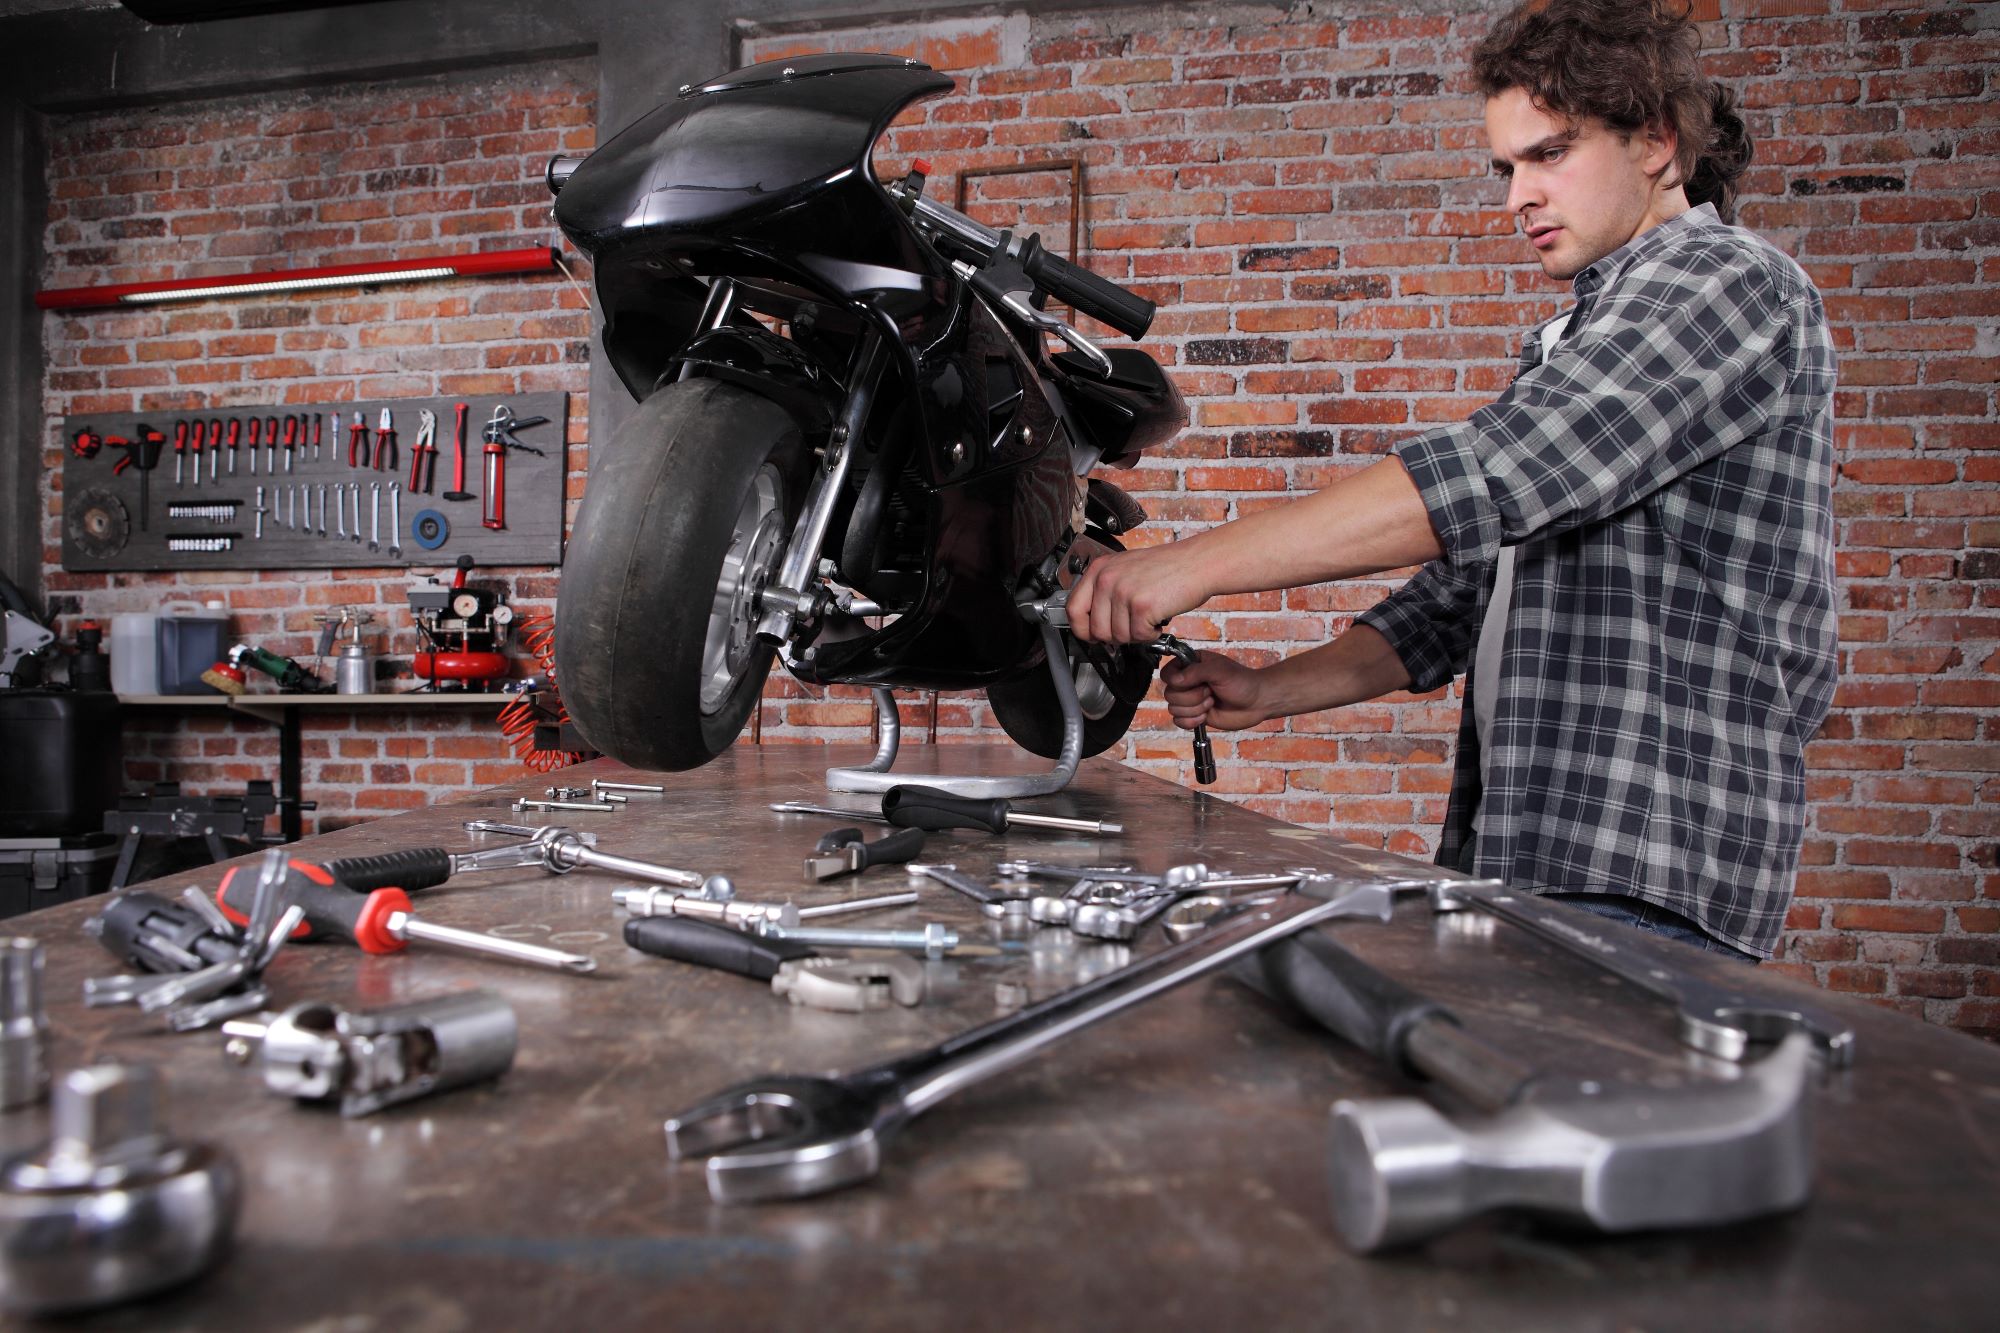 Learn these DIY motorcycle repairs and checks now